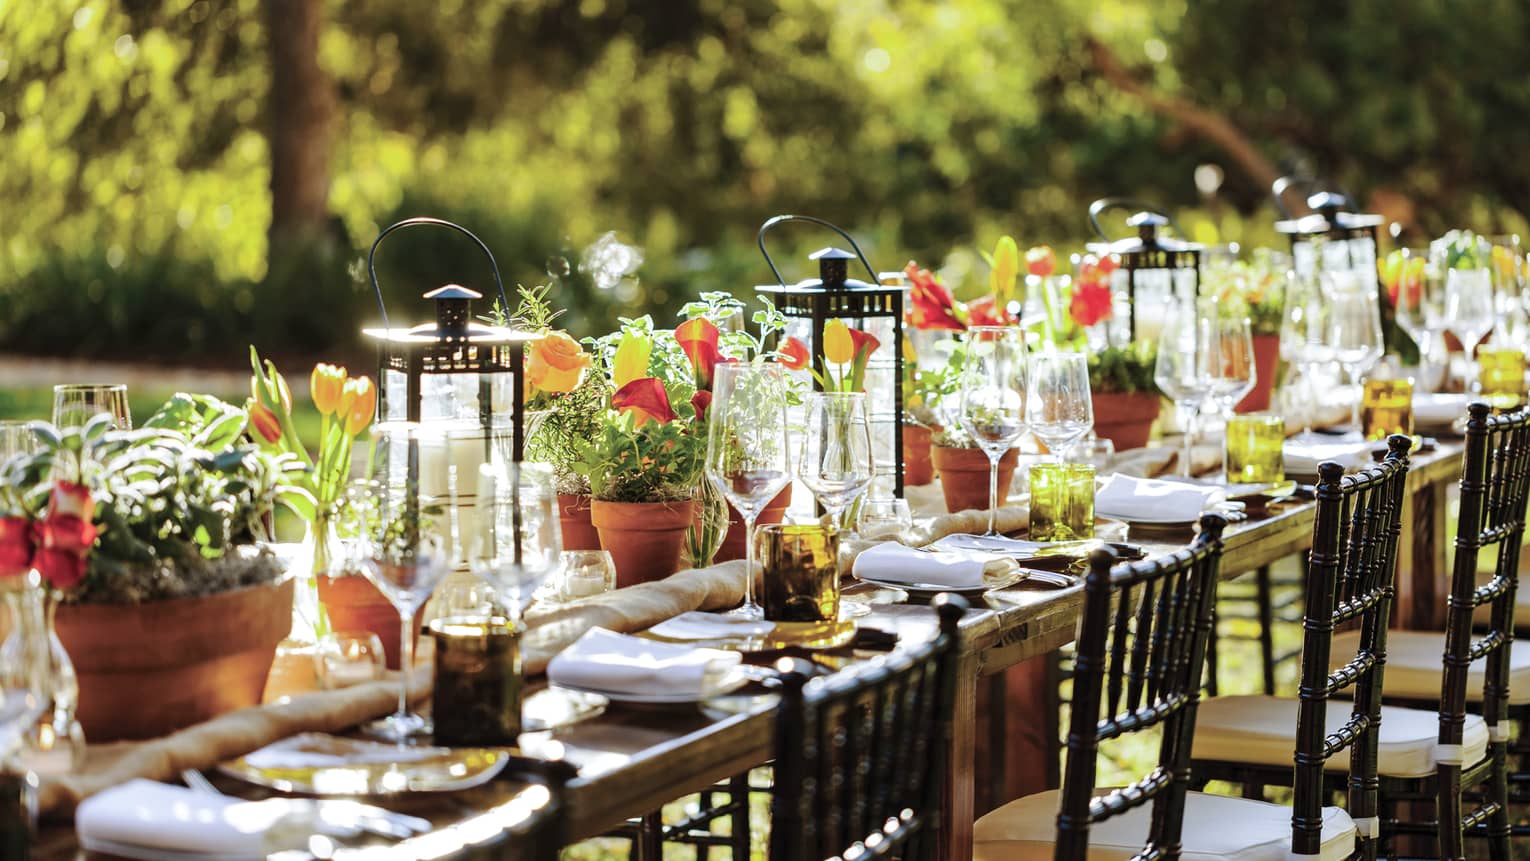 Long outdoor dining table in vineyard set with wine glasses, dishes, large lanterns, flowers